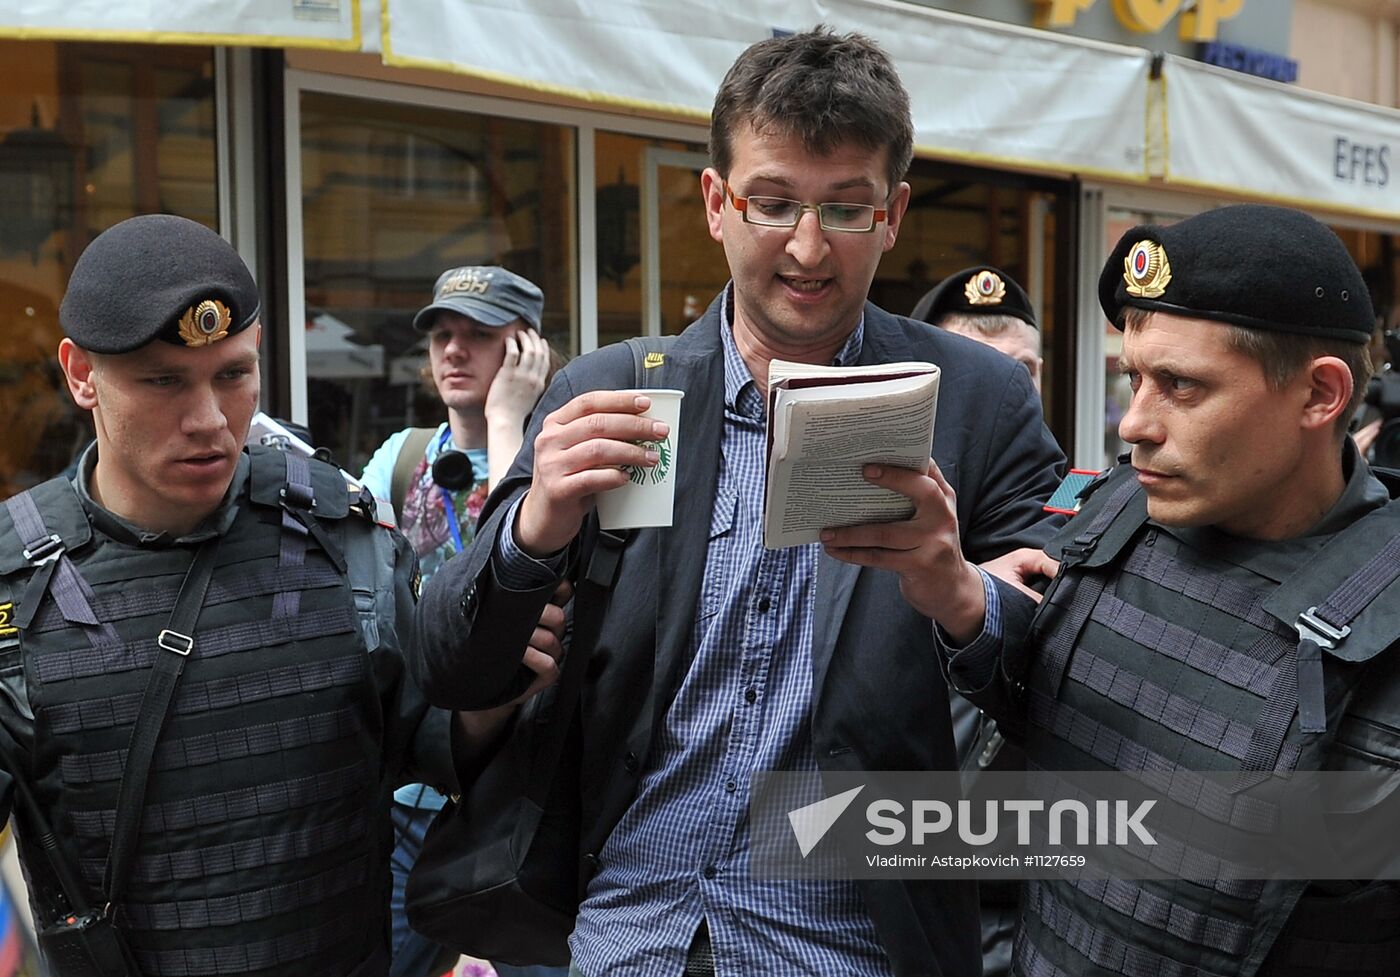 Protesters detained on Arbat Street, Moscow